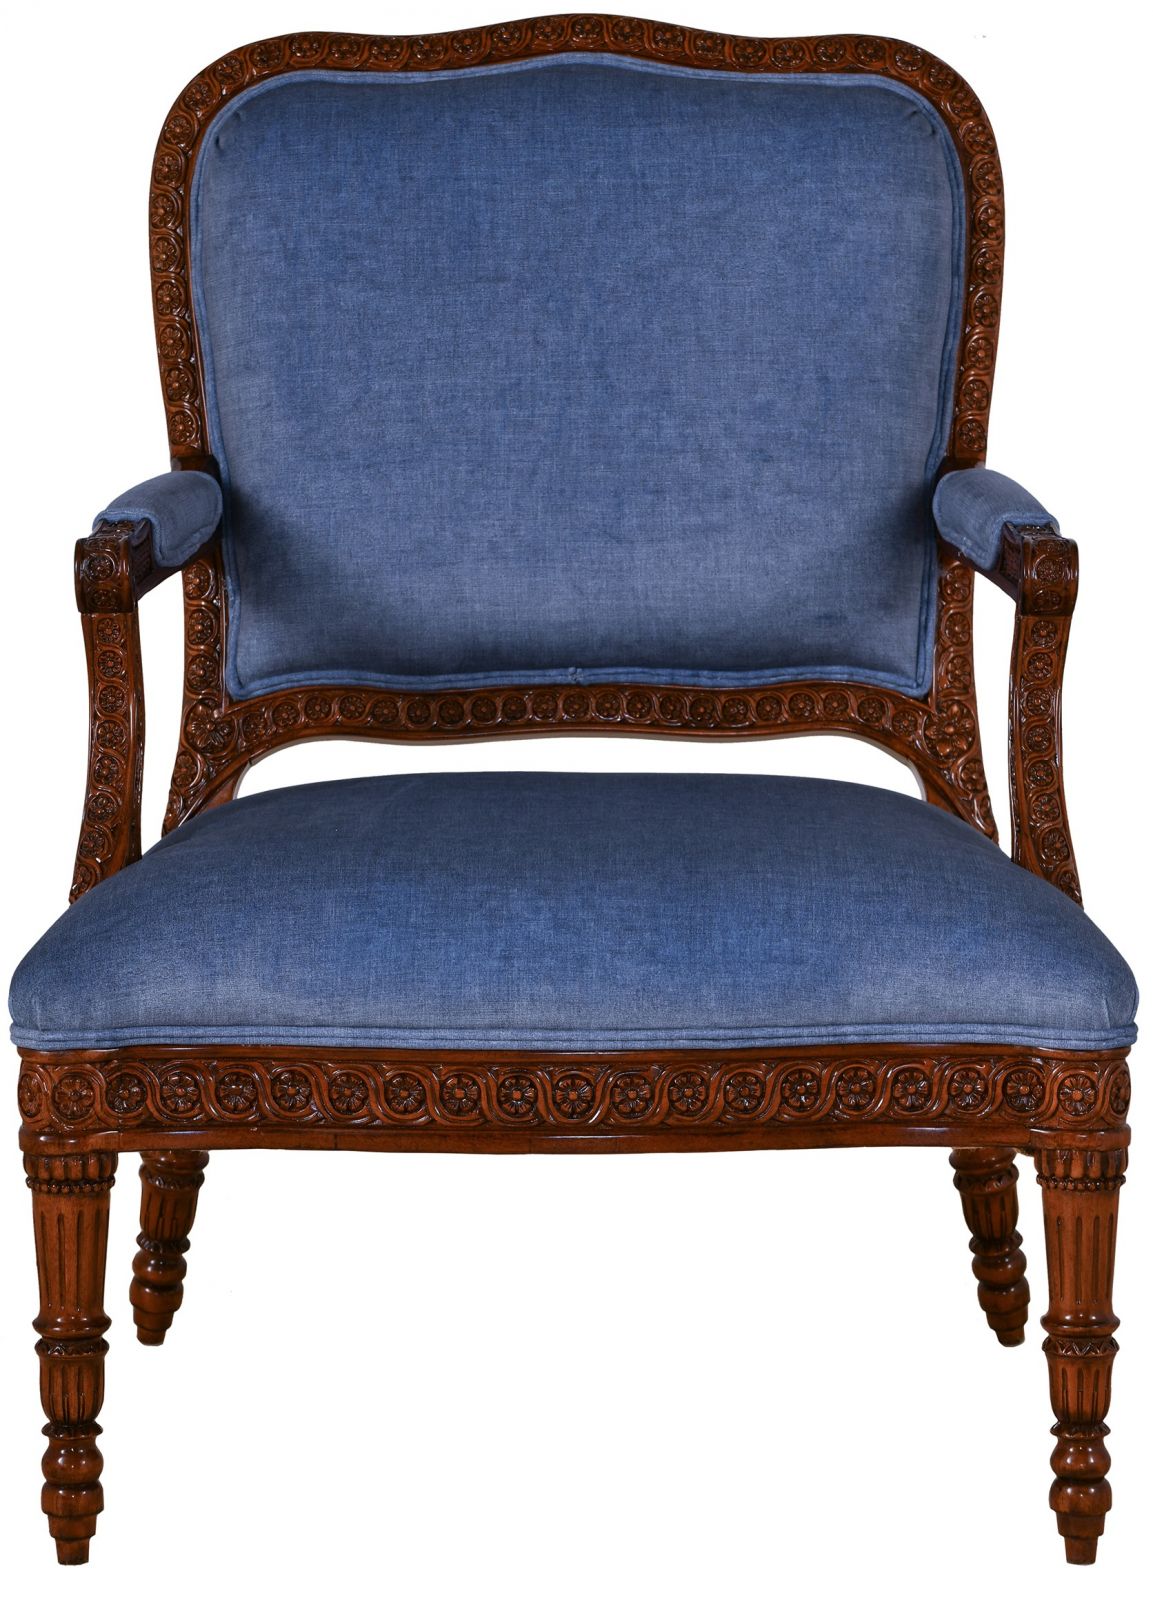 James Chair in new mahogany. Seat in Wemyss Fiora 27 Bluebell